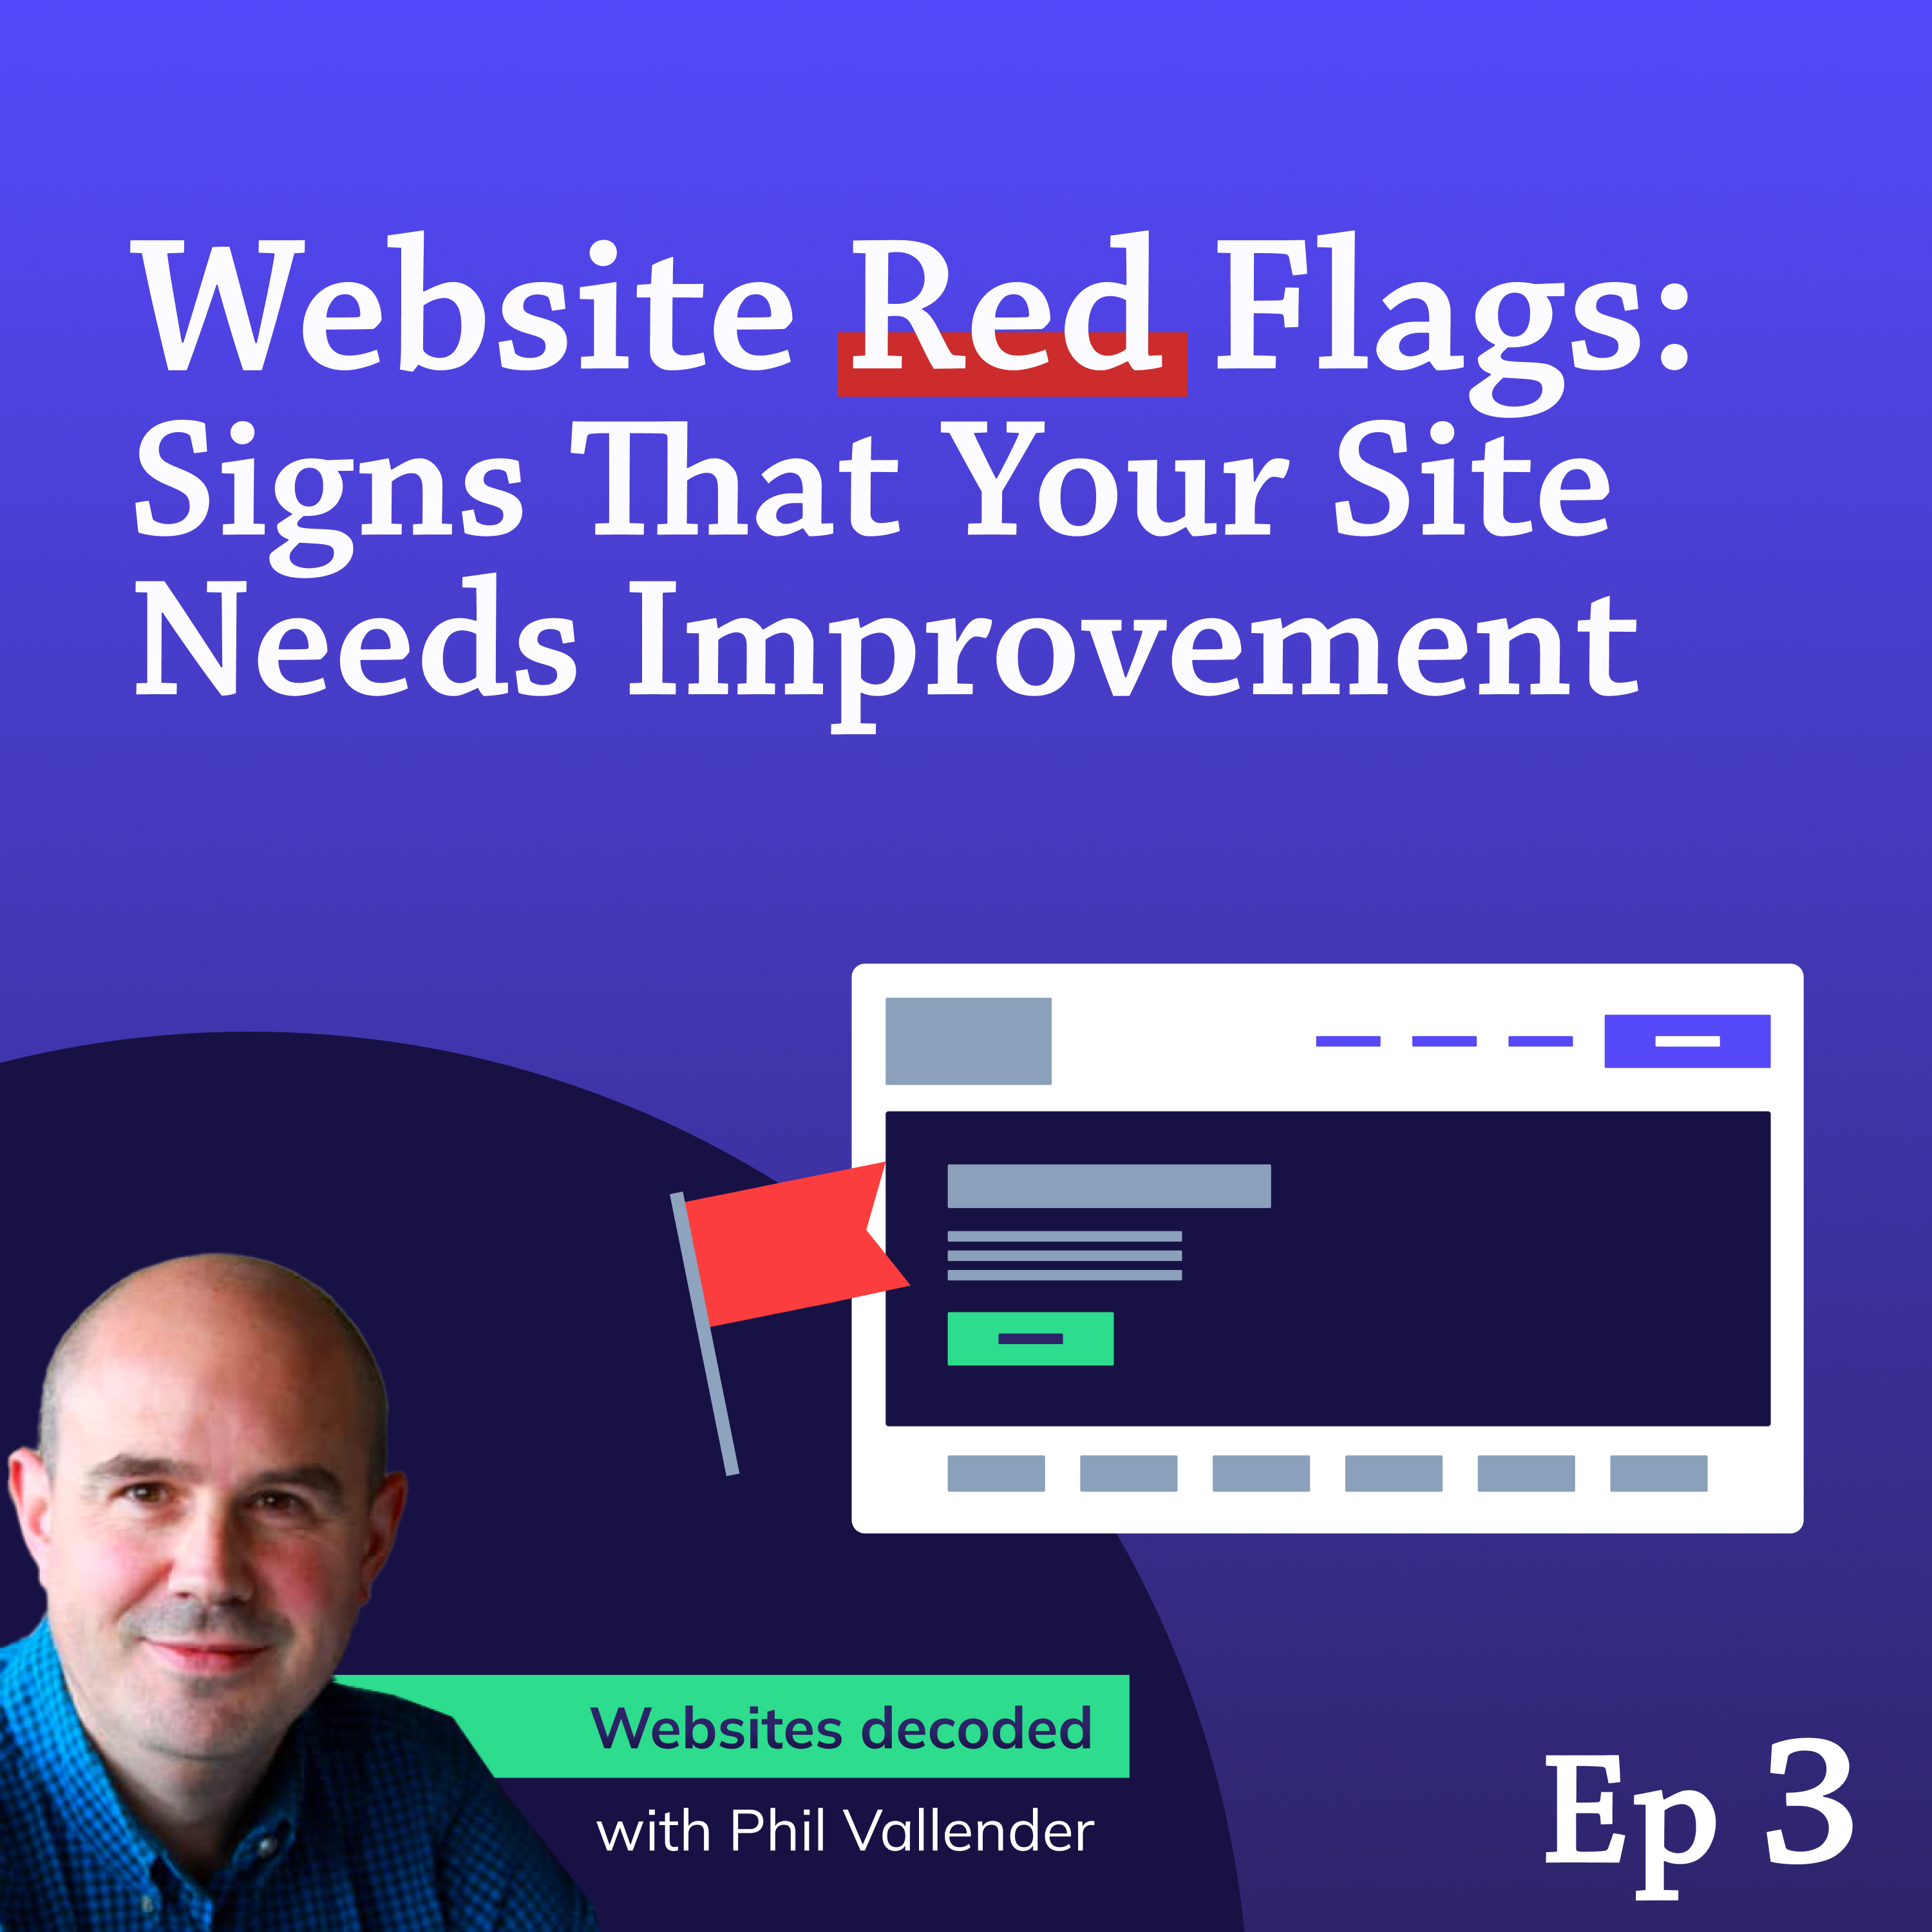 Website Red Flags: Signs That Your Site Needs Improvement